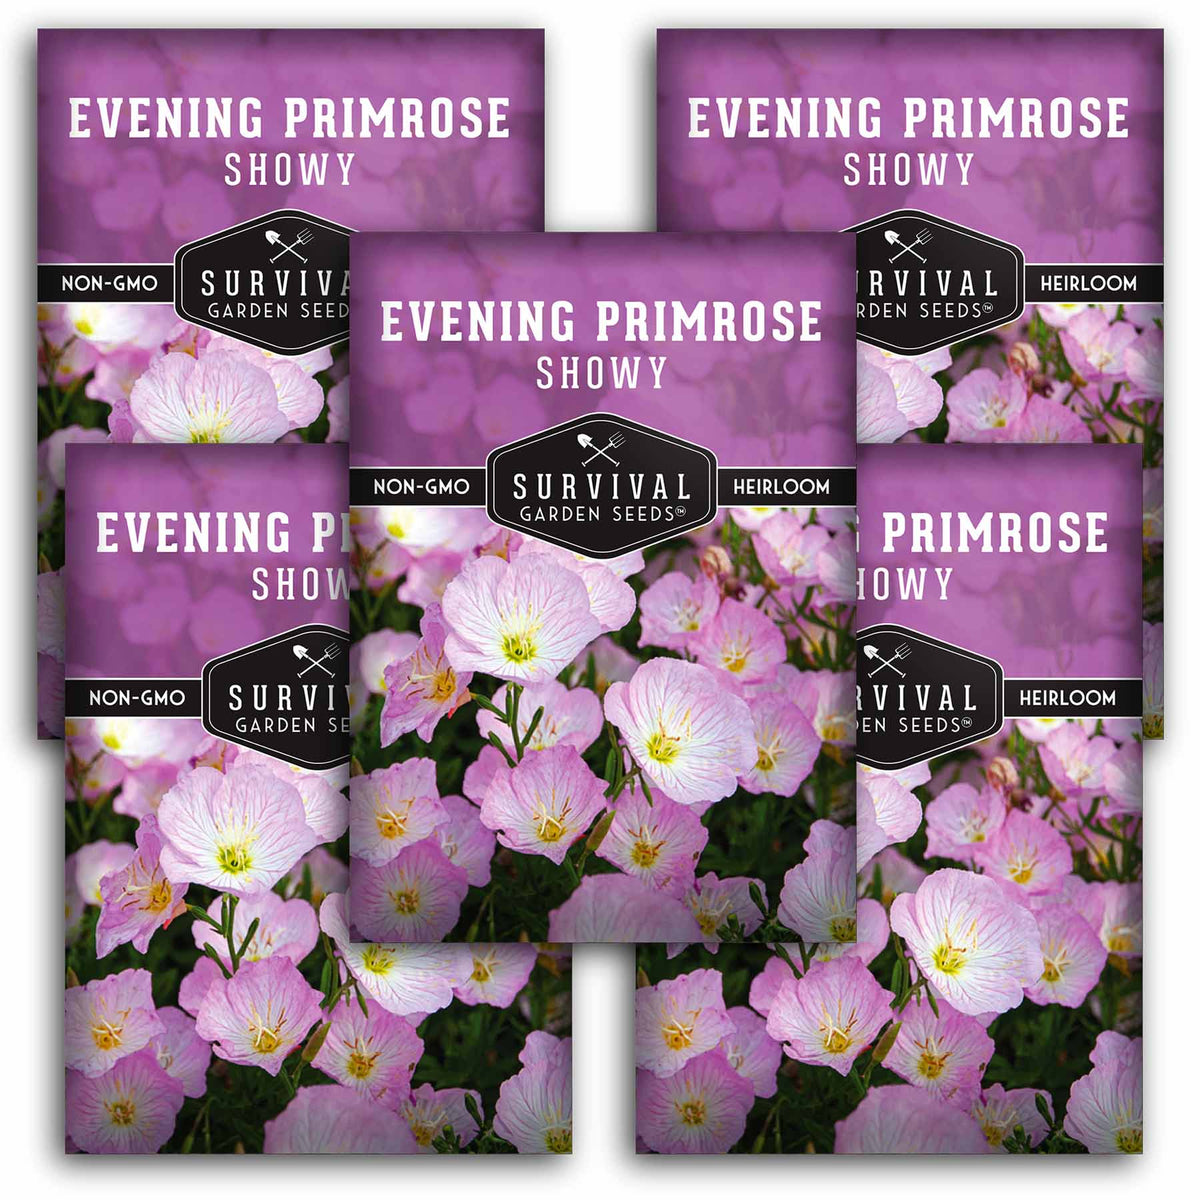 5 packets of Showy Evening Primrose seeds